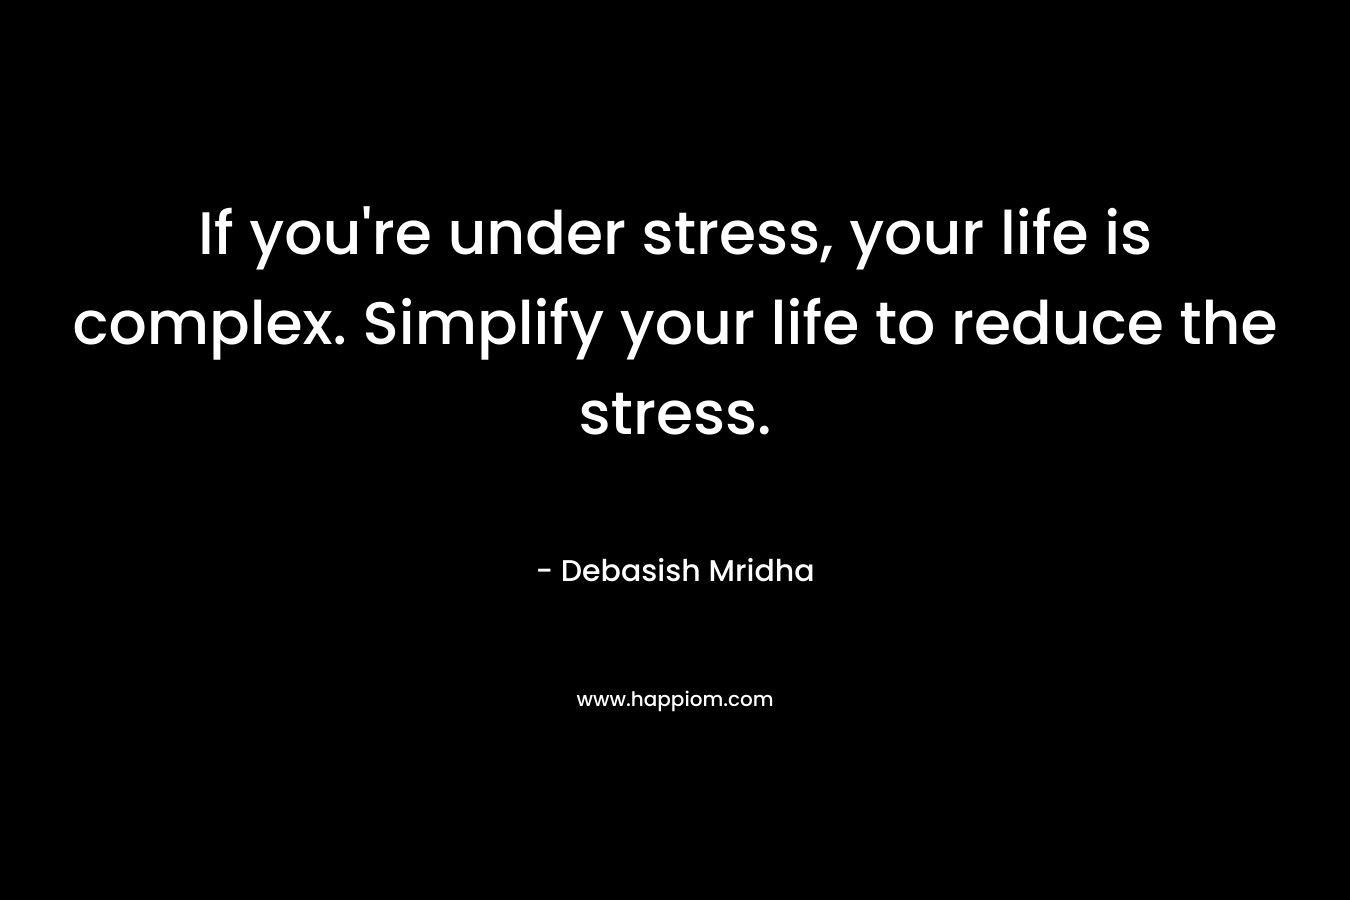 If you're under stress, your life is complex. Simplify your life to reduce the stress.